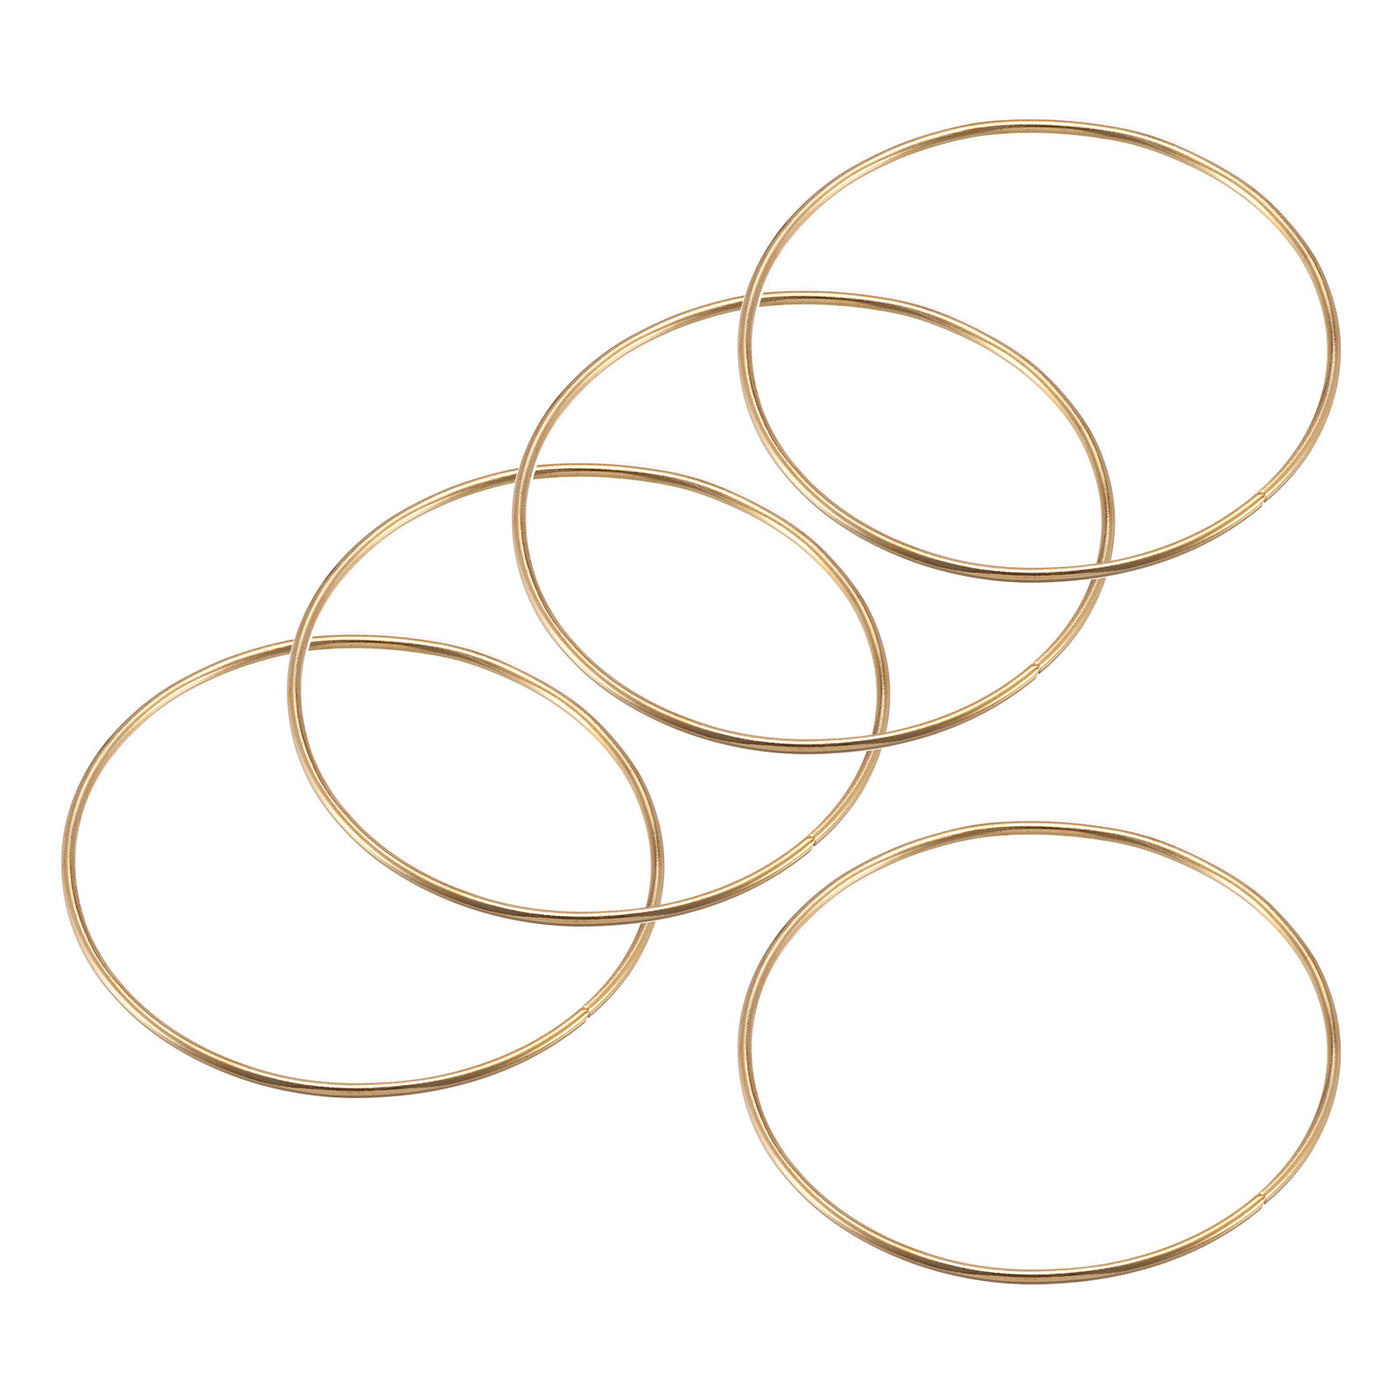 uxcell Uxcell 110mm(4.33") OD Metal O Ring Non-Welded Craft Hoops for DIY Gold Tone 5pcs